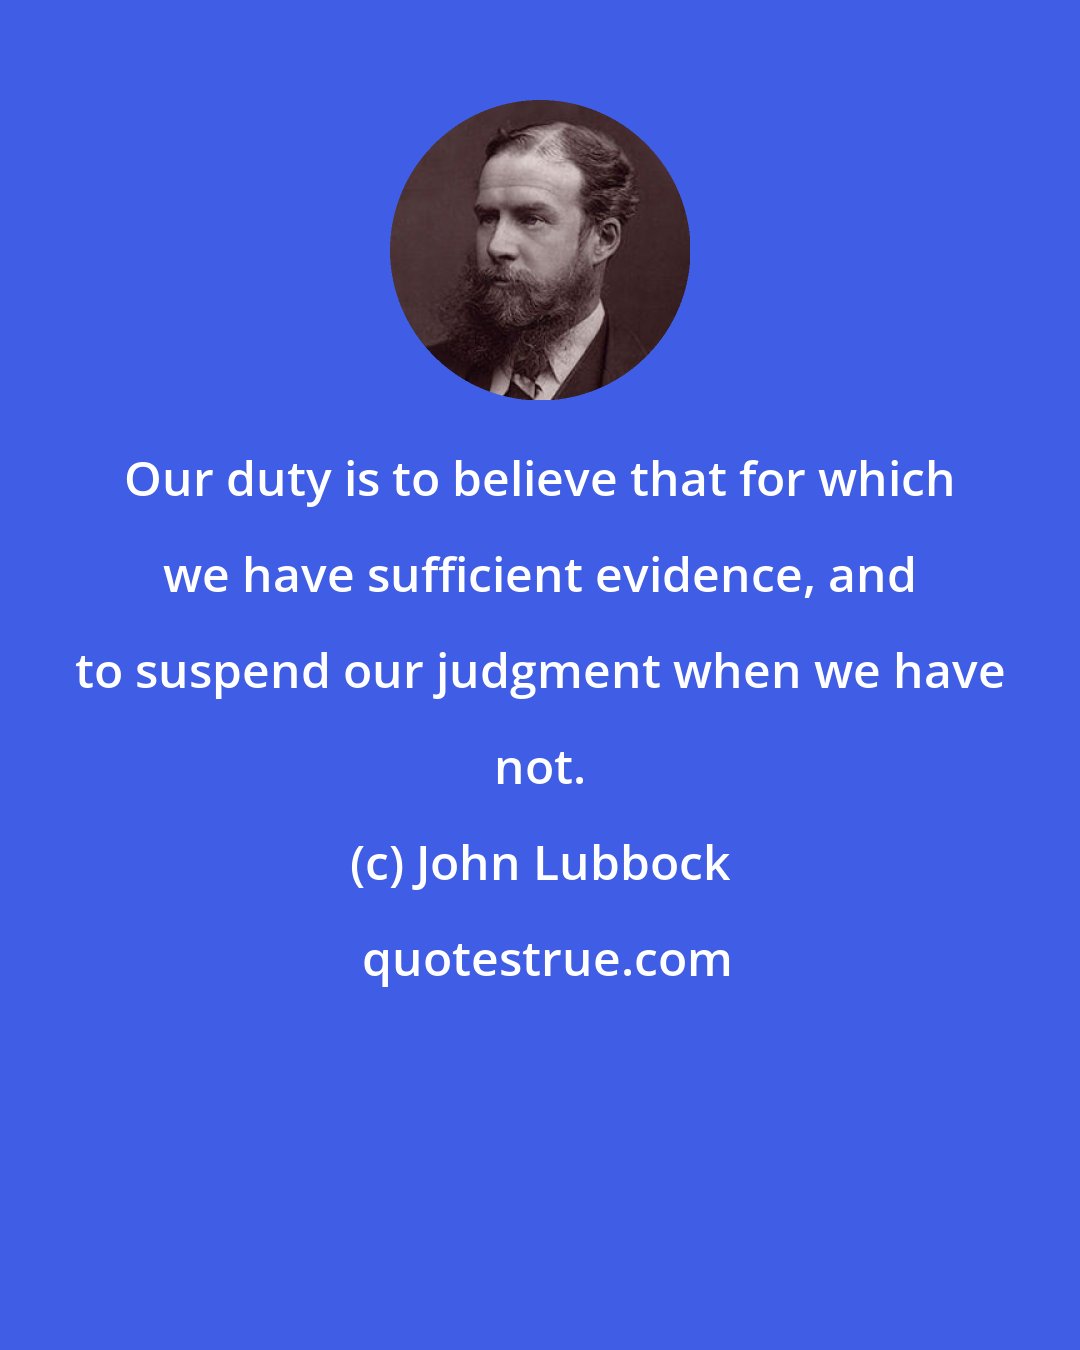 John Lubbock: Our duty is to believe that for which we have sufficient evidence, and to suspend our judgment when we have not.